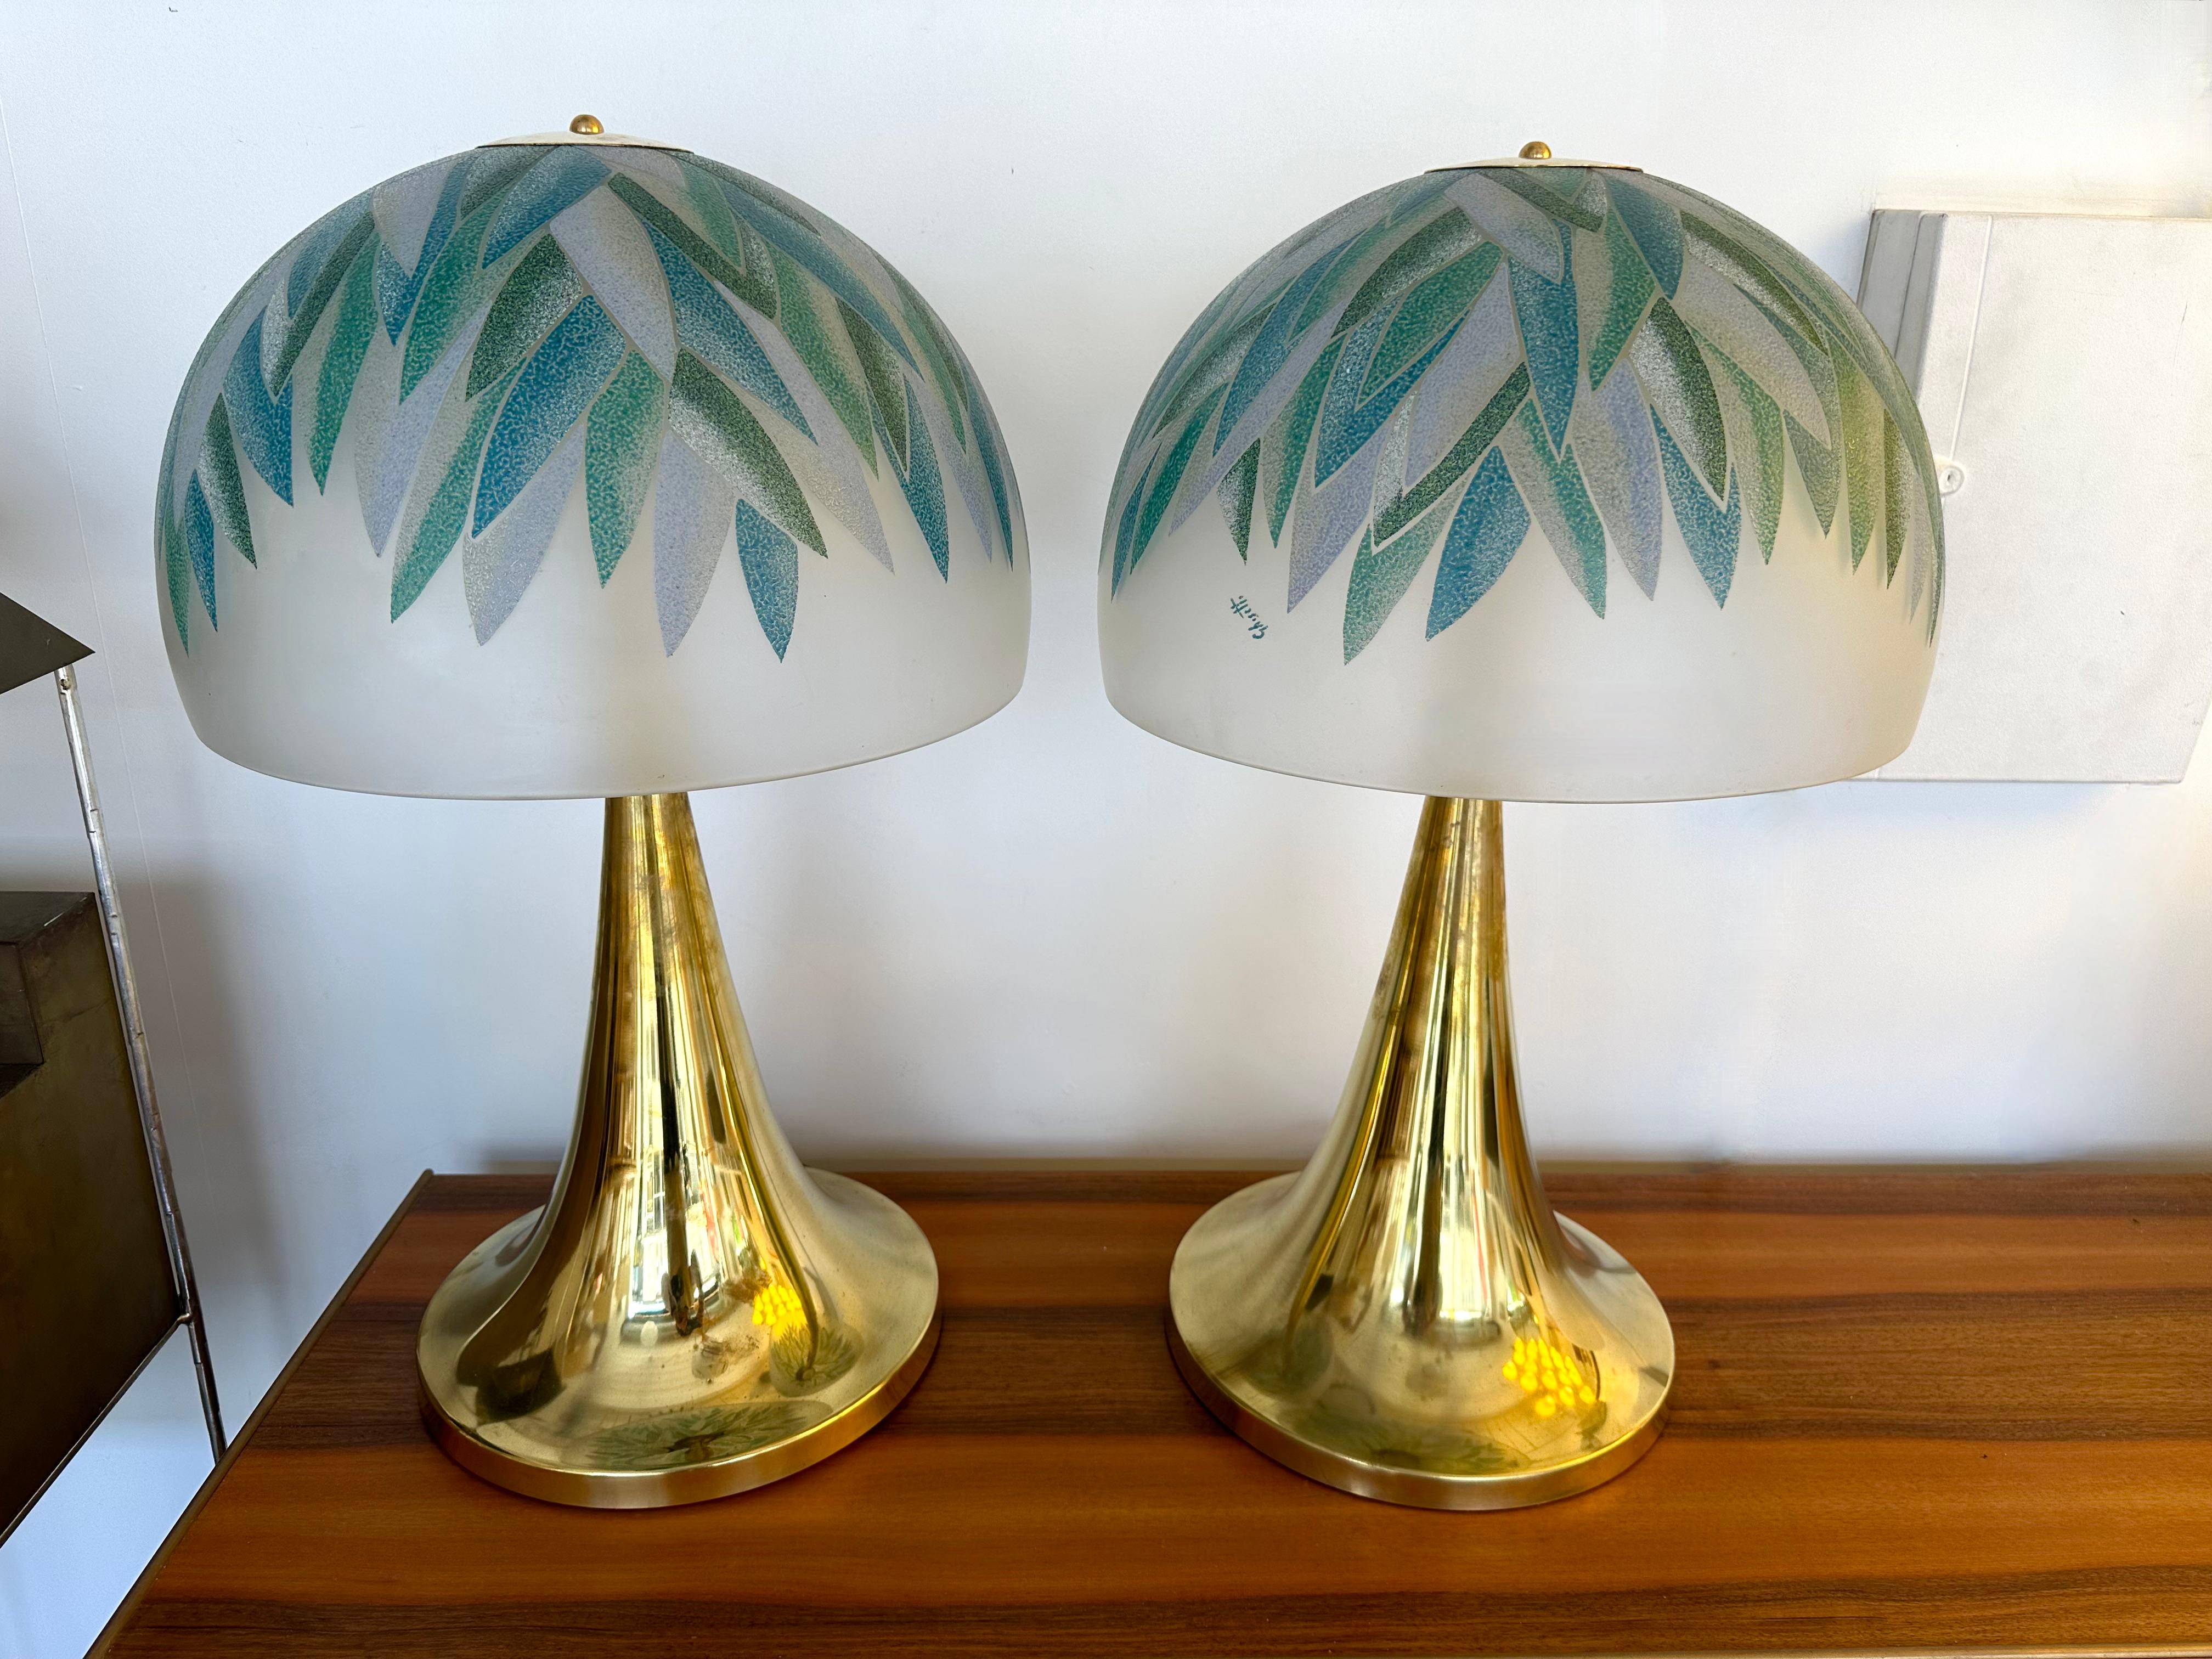 Mid-Century Modern Hollywood Regency Pair of palm tree satinated Murano glass shades with palm leaf decor green and blue and brass base by the murano italian design manufacture Ghisetti, signed on the glass. Famous design like Venini, Mazzega, La